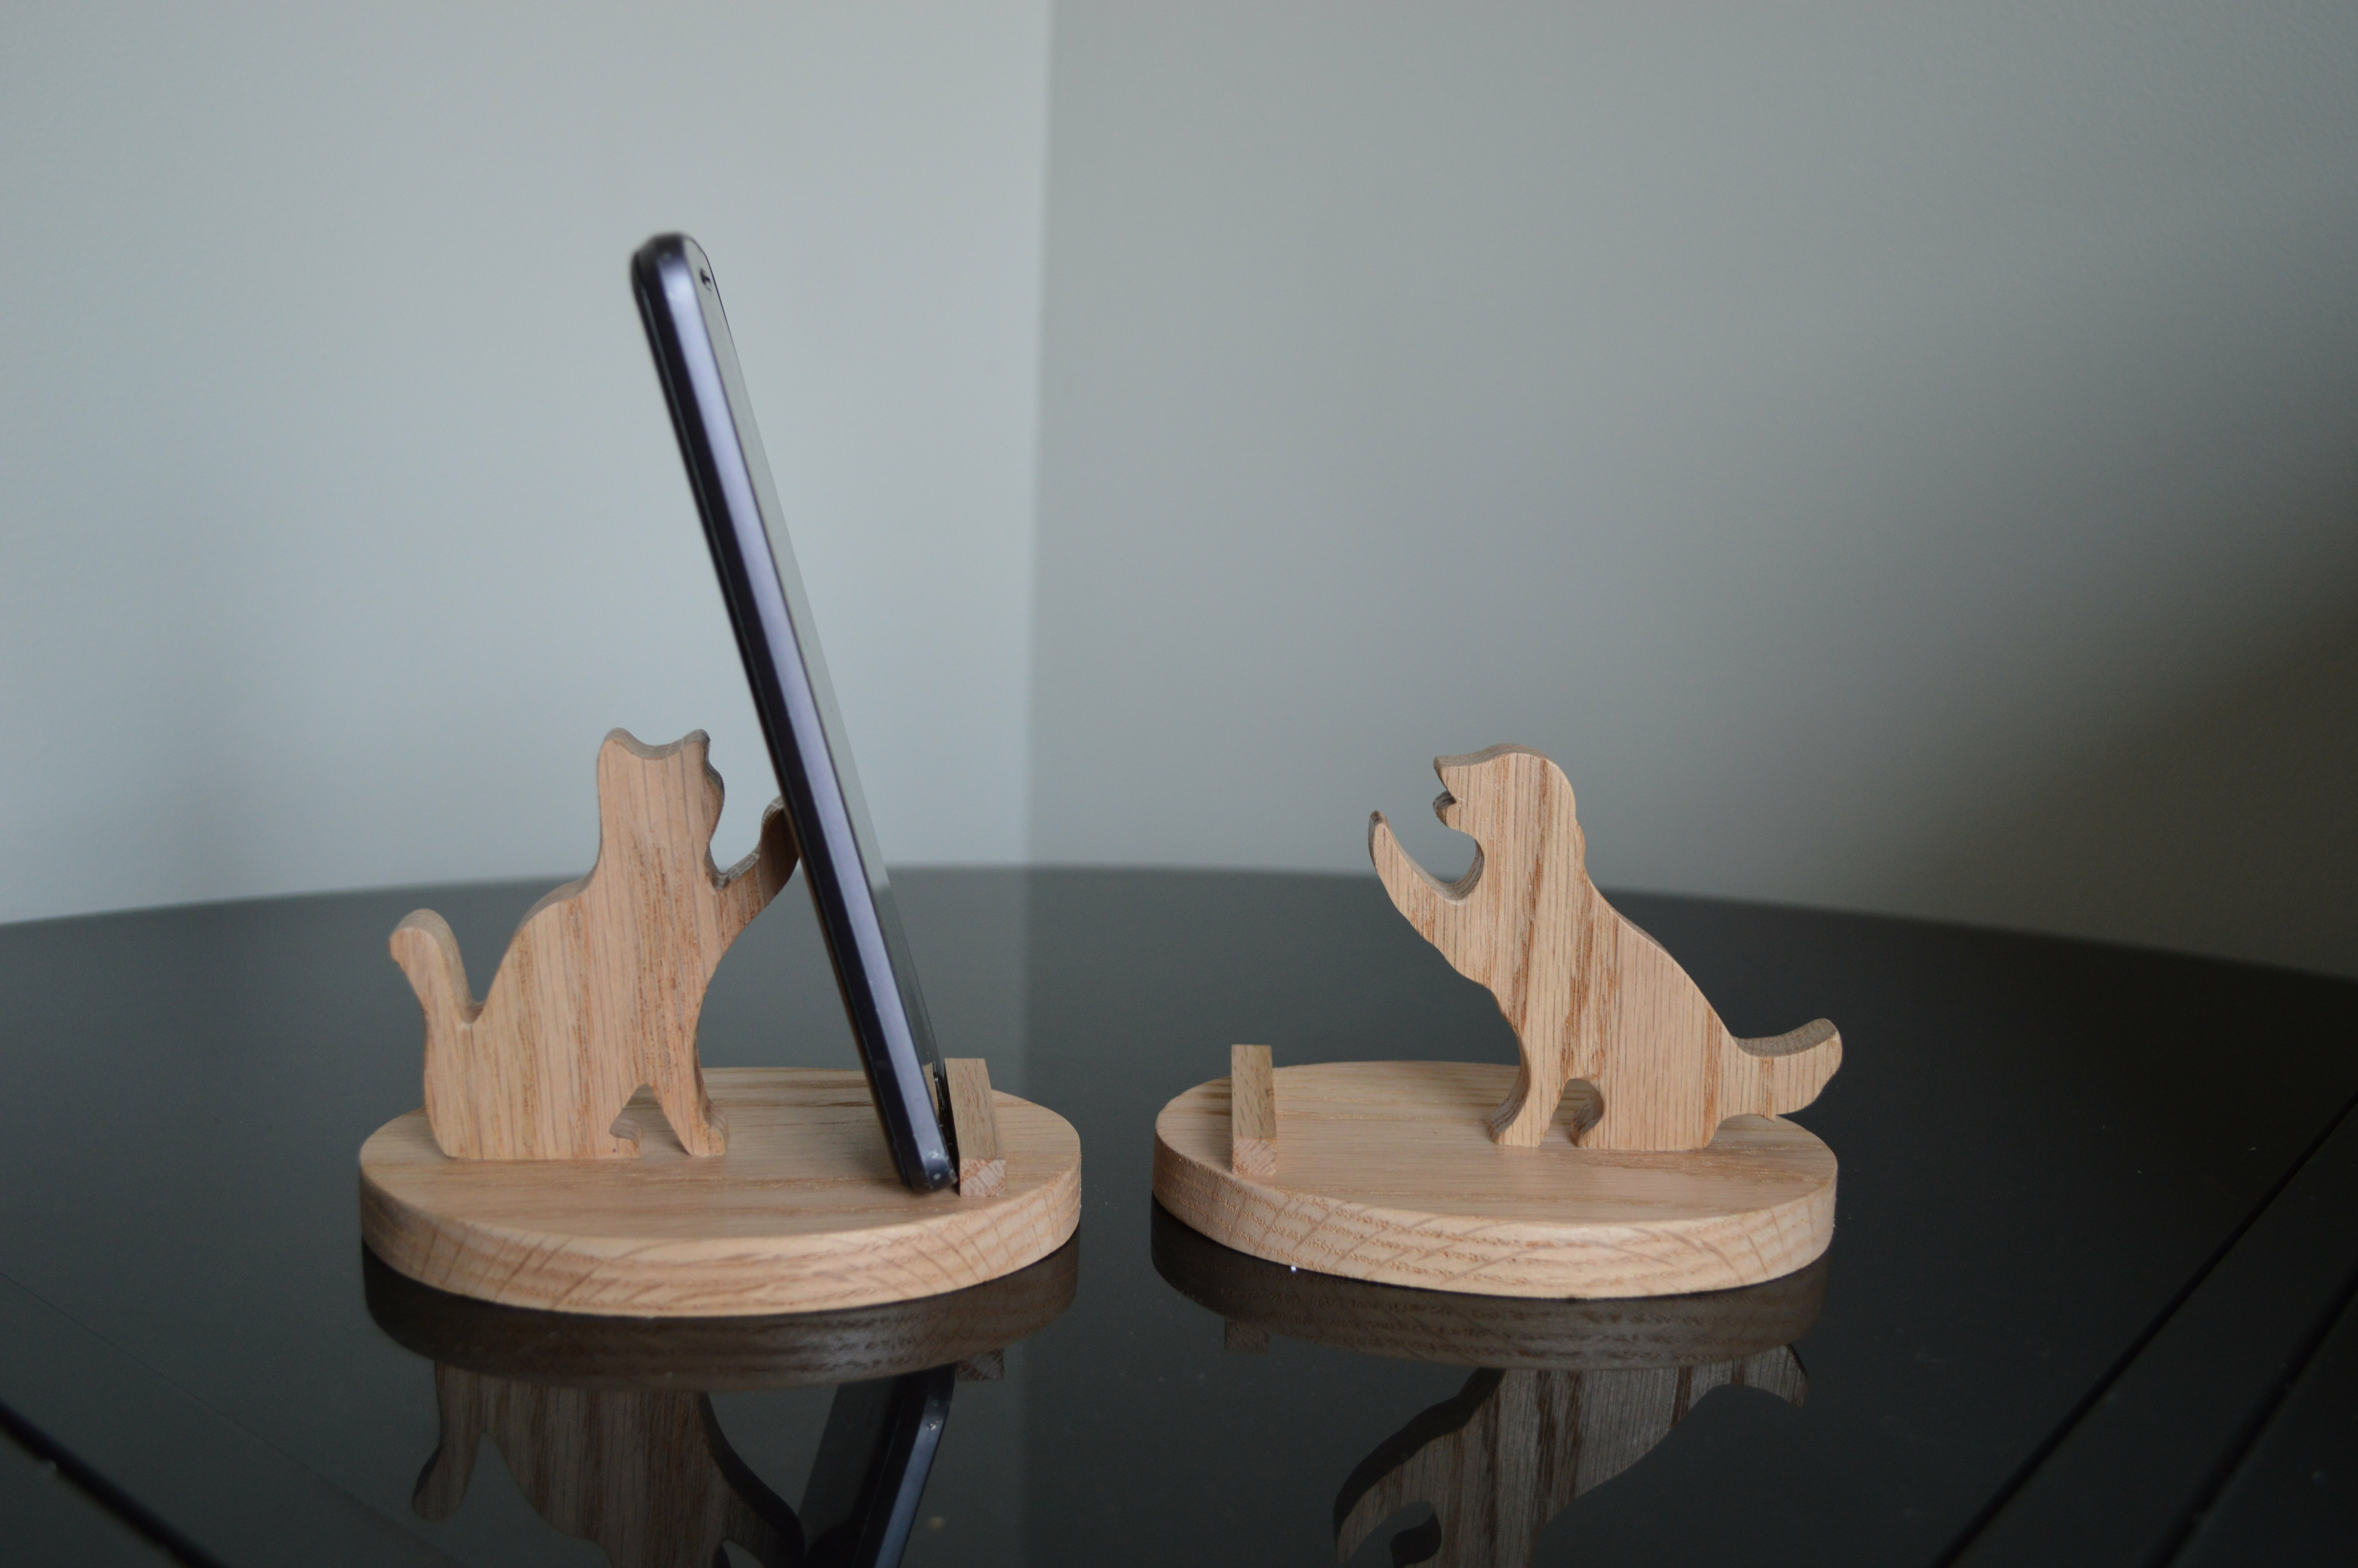 Oak Animal Cell Phone Stand | Inked Woodworking